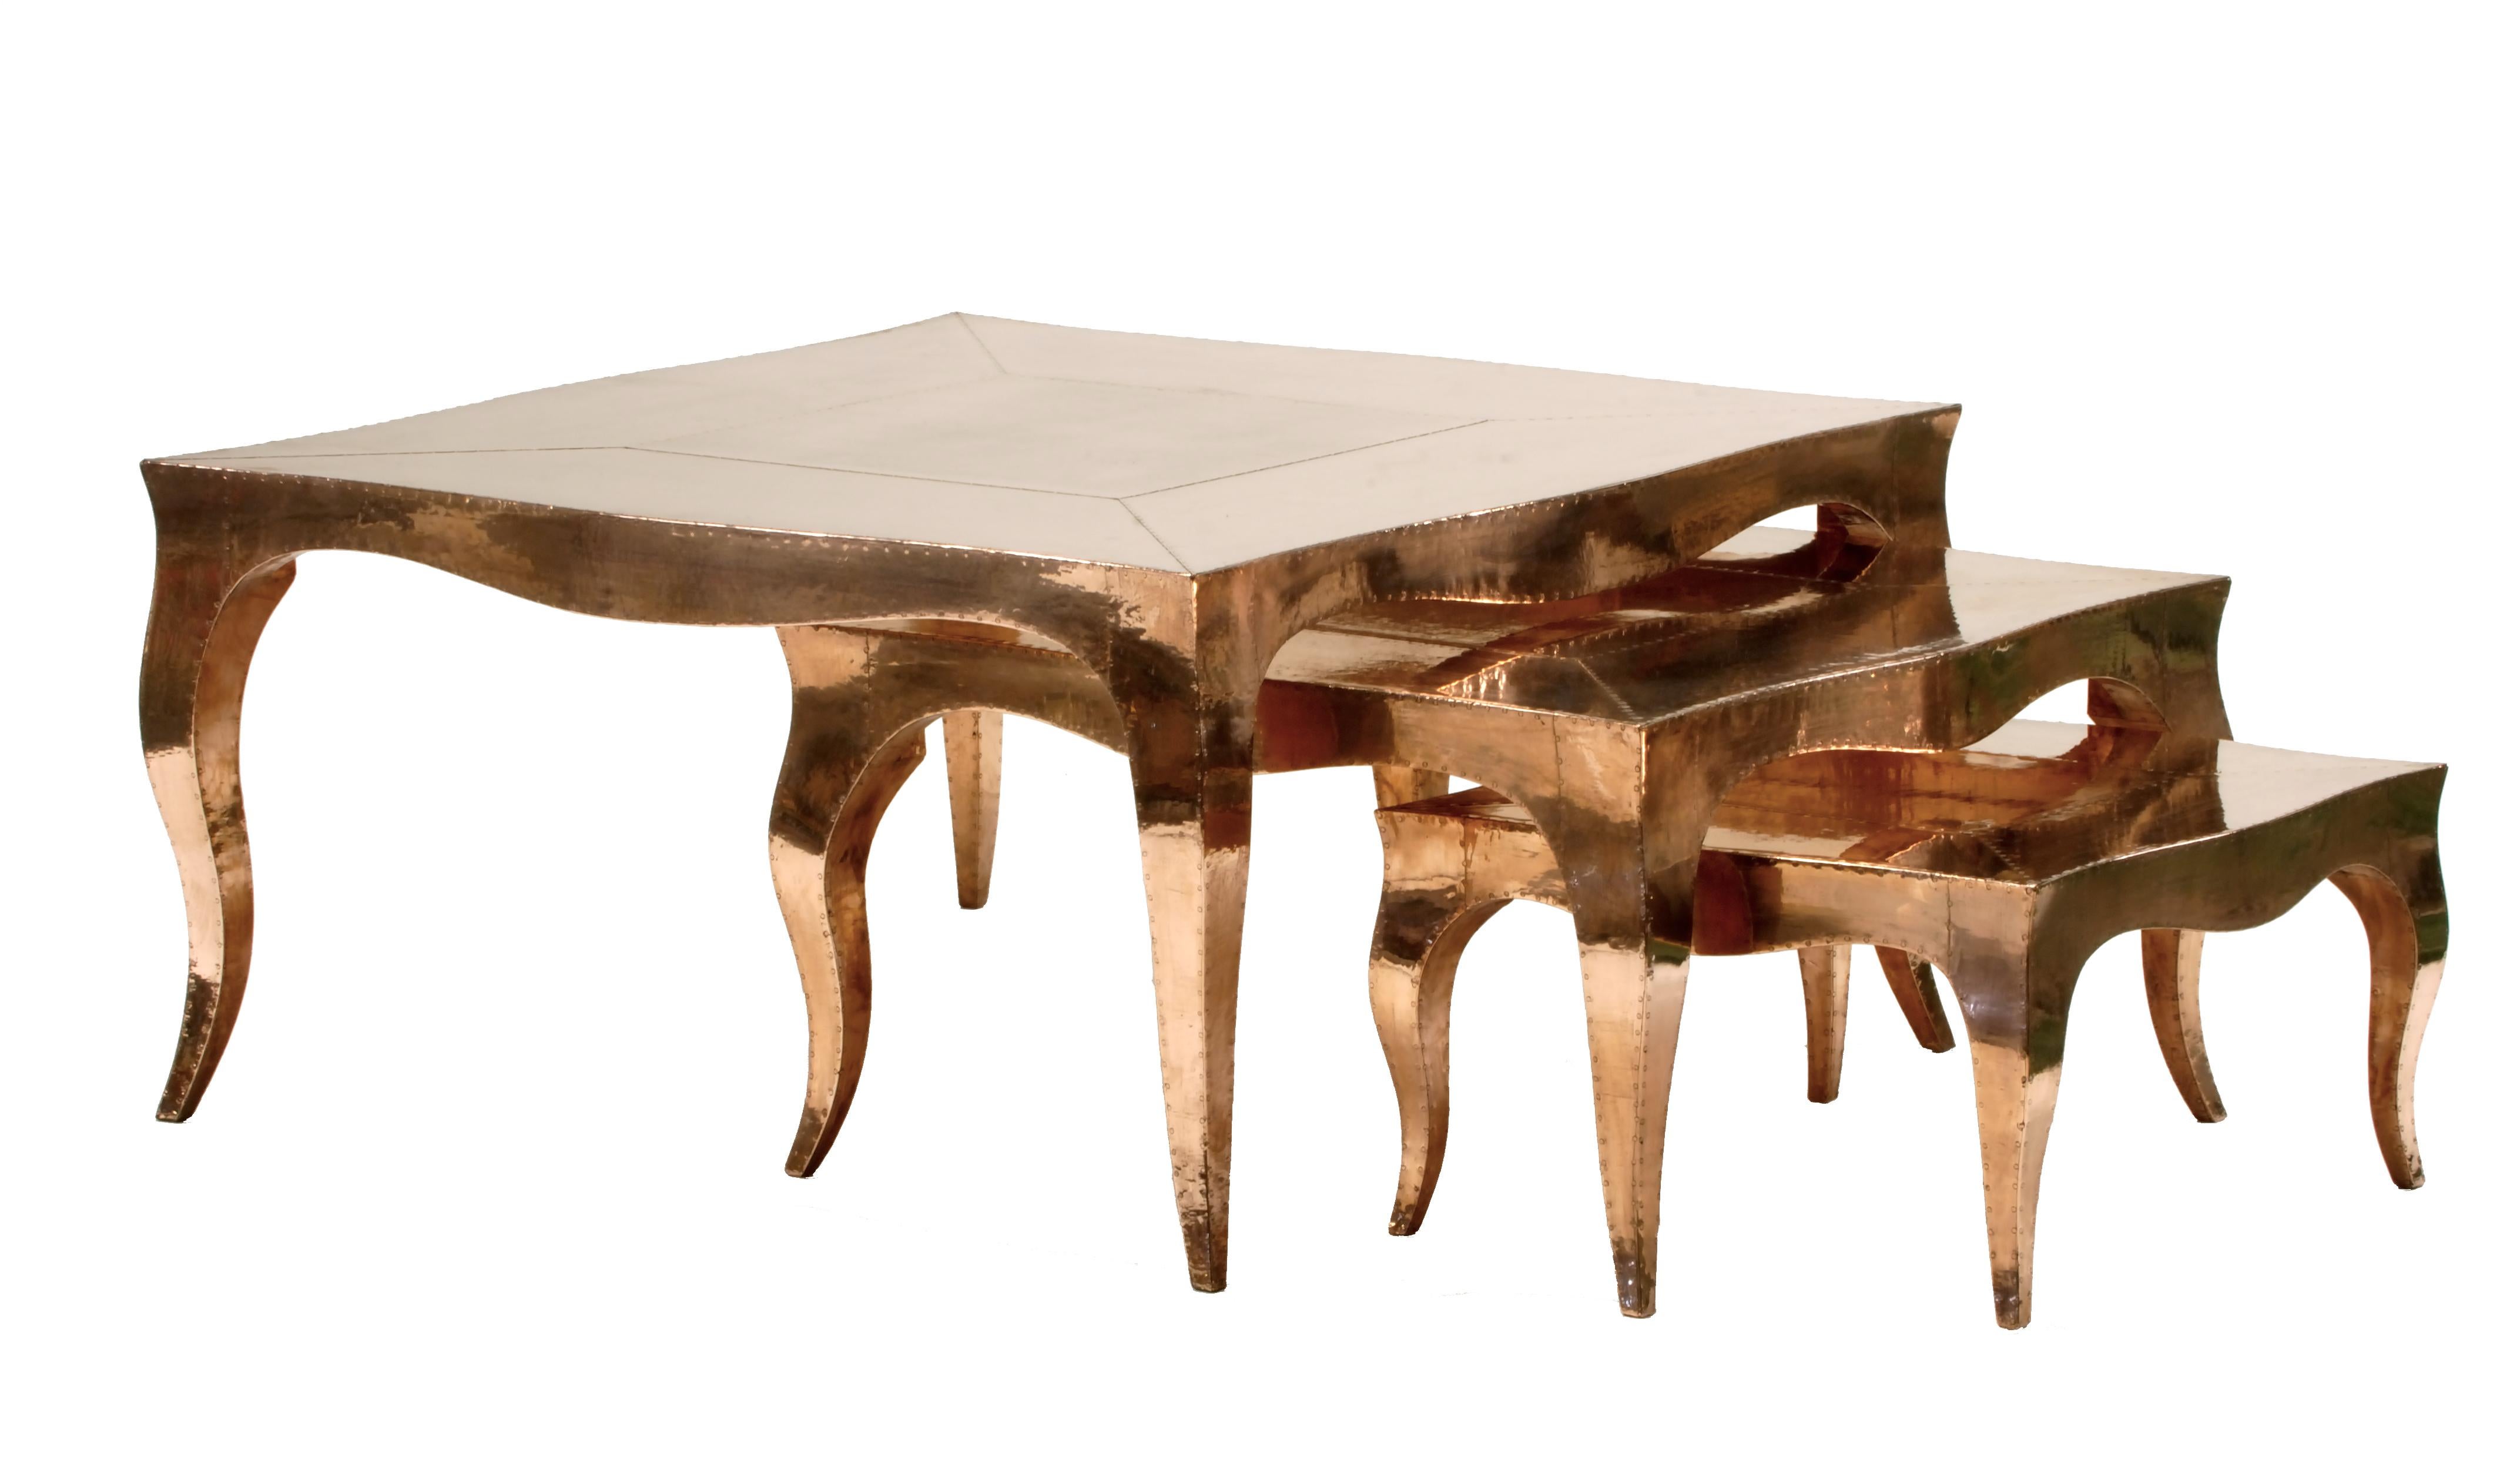 Louise Art Deco Industrial and Work Tables Mid. Hammered Copper by Paul Mathieu For Sale 10